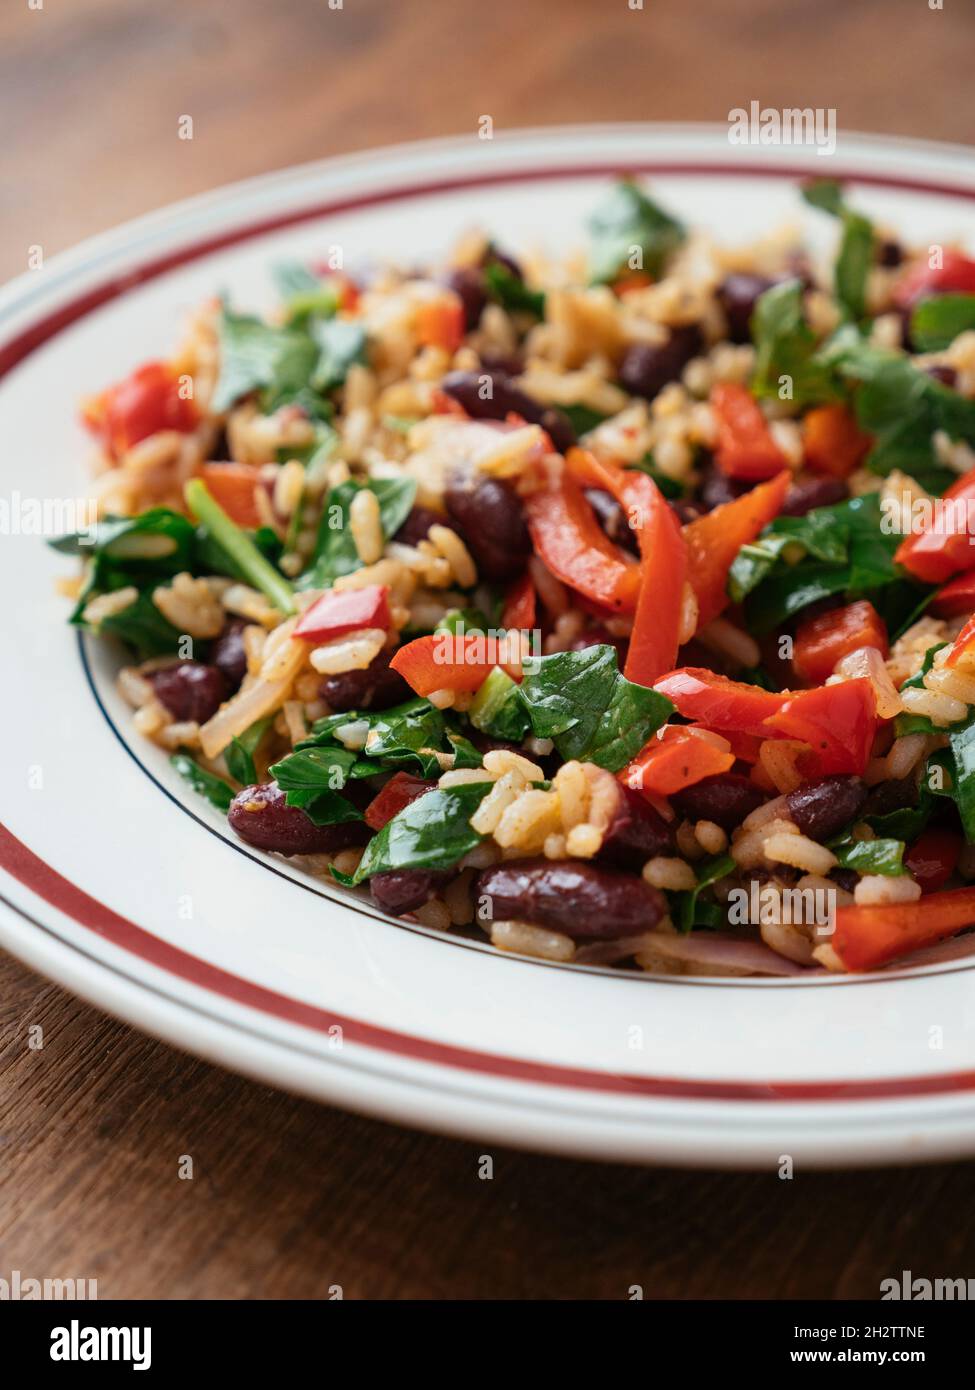 Rice and Beans with Sauteed Greens Stock Photo